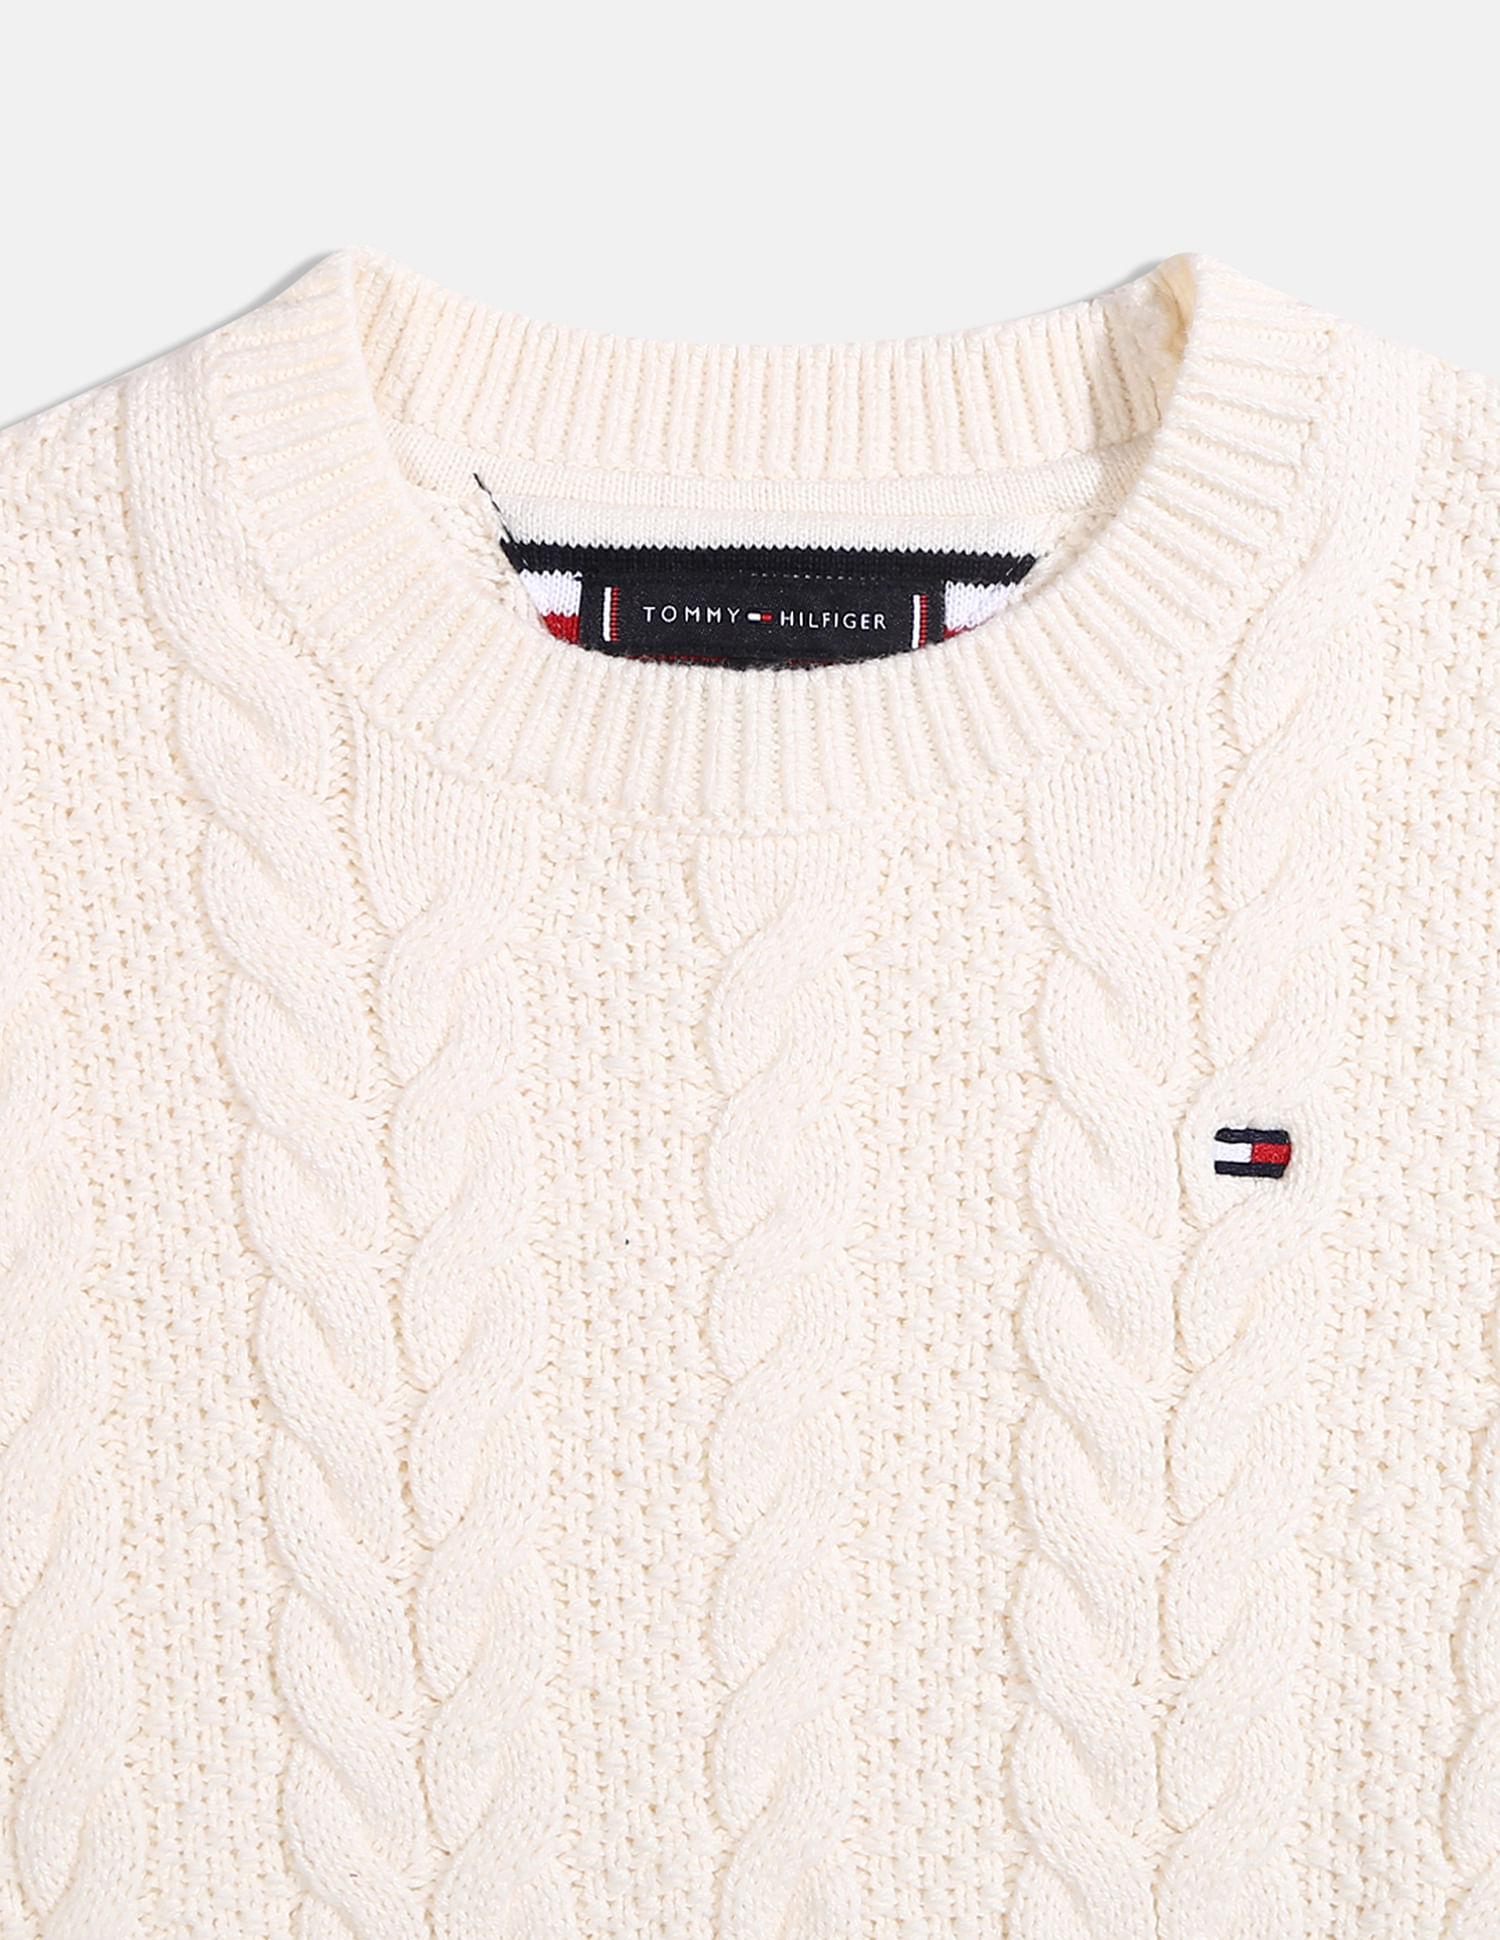 Buy Tommy Hilfiger Kids Boys Ivory Essential Cable Knit Sweater